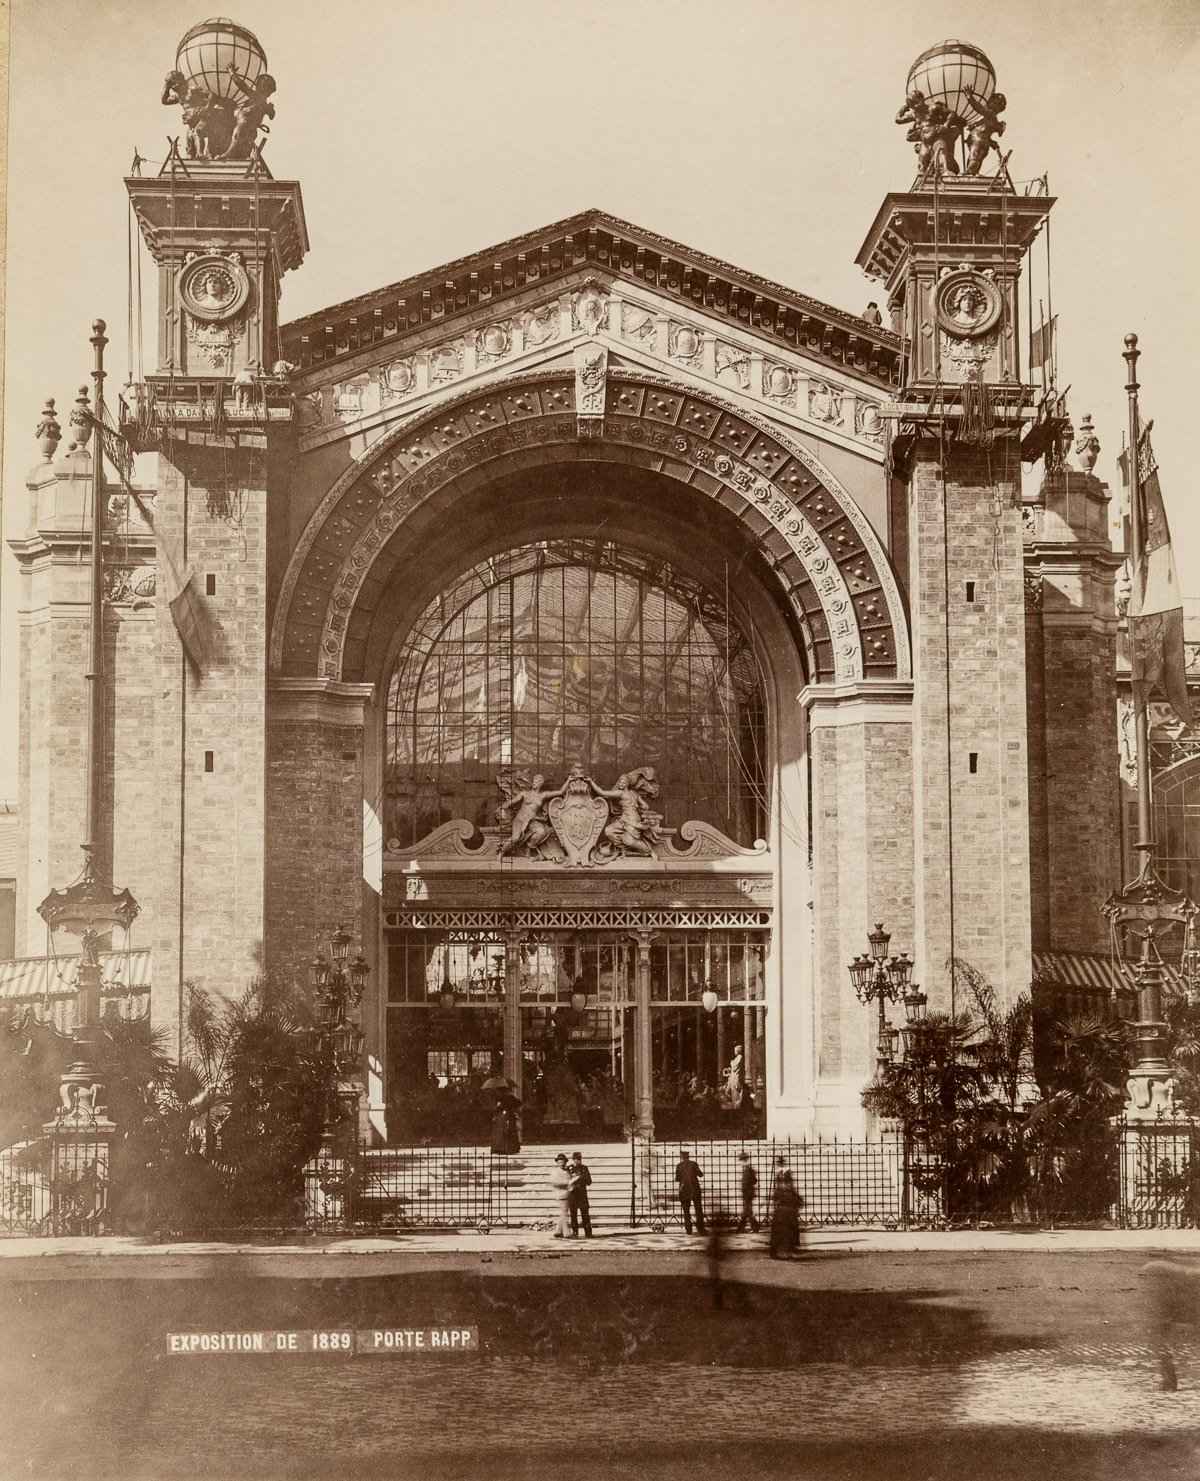 The entrance to an exhibition hall